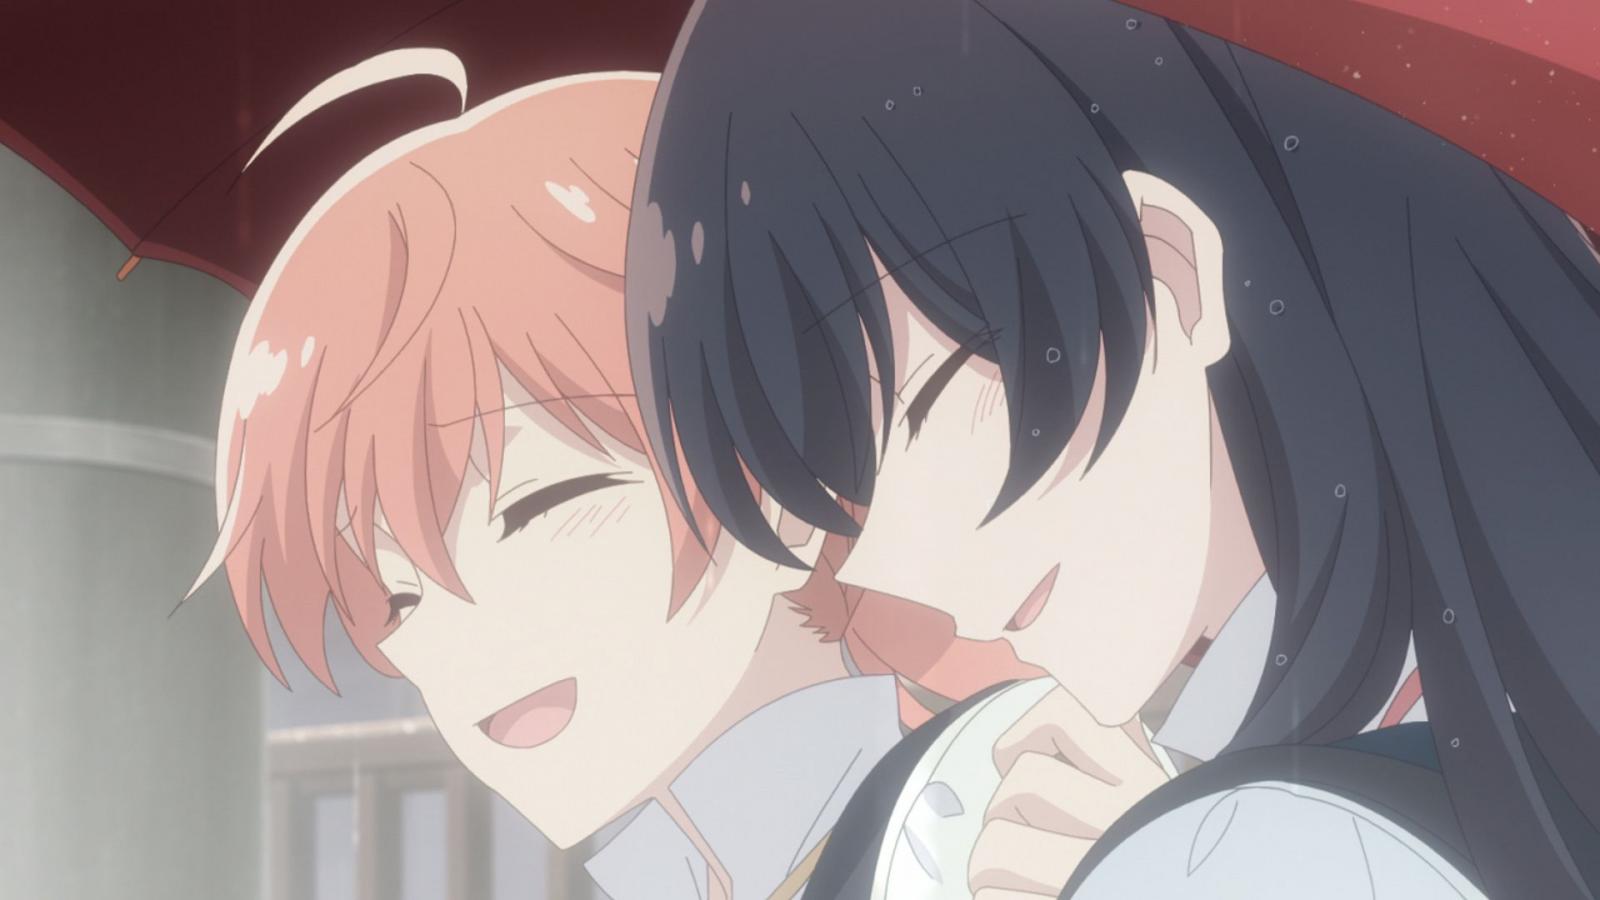 Bloom Into You - Gesamtedition - Volume 1-3: Episode 01-13 [Blu-ray] Image 2